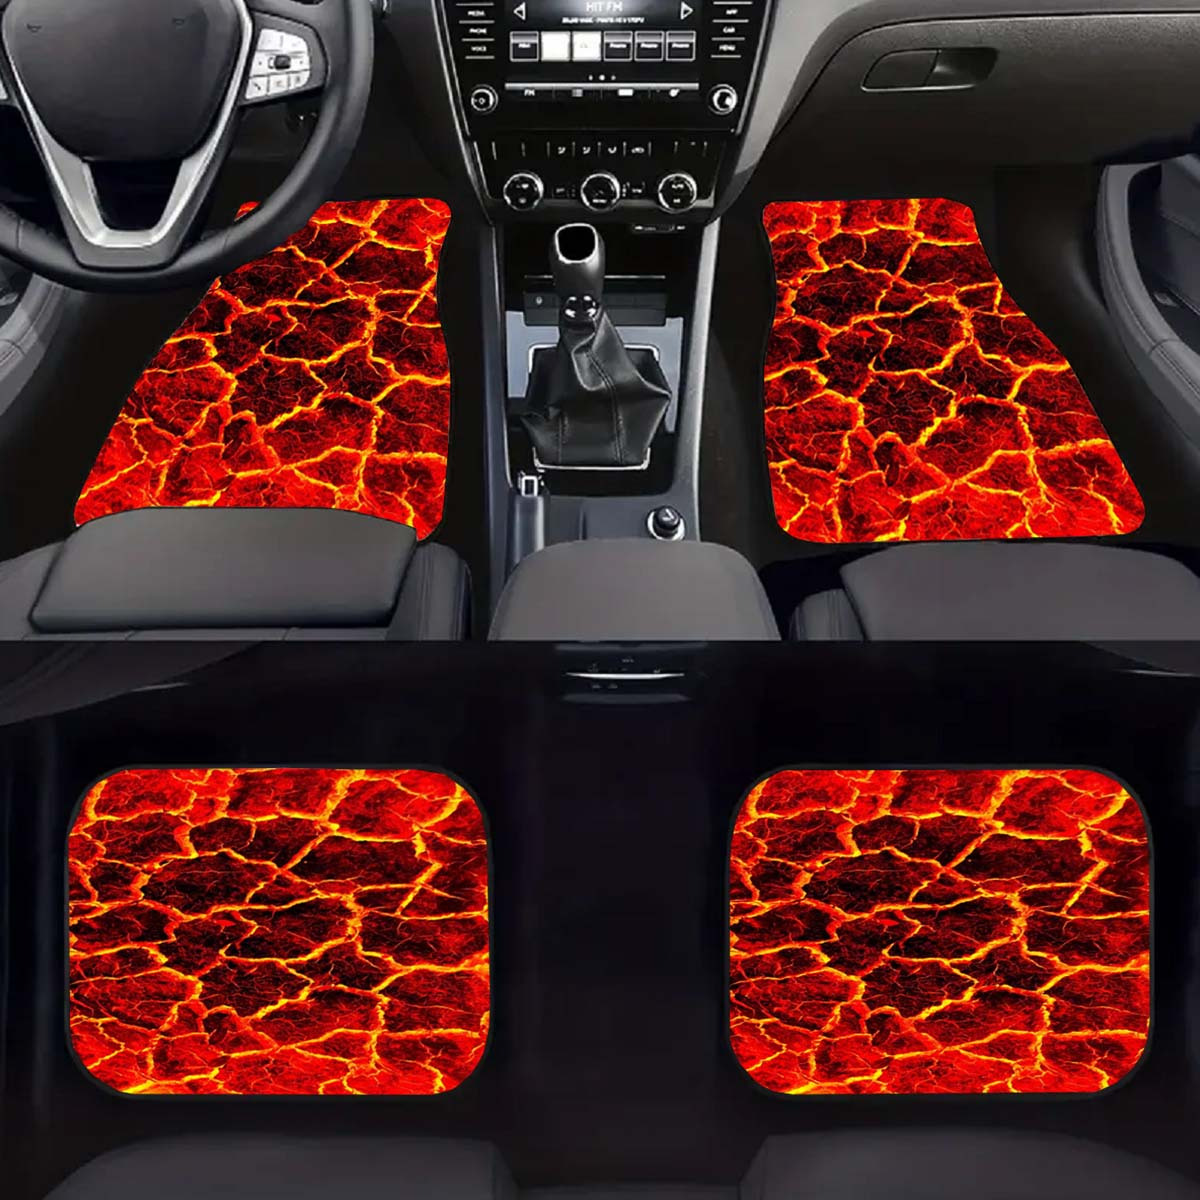 

Lava Print Car Floor Mats 2/4pc Set - Universal Fit For Trucks, Suvs & , Polyester Front & Rear Carpet Mats For Enhanced Interior Protection & Style